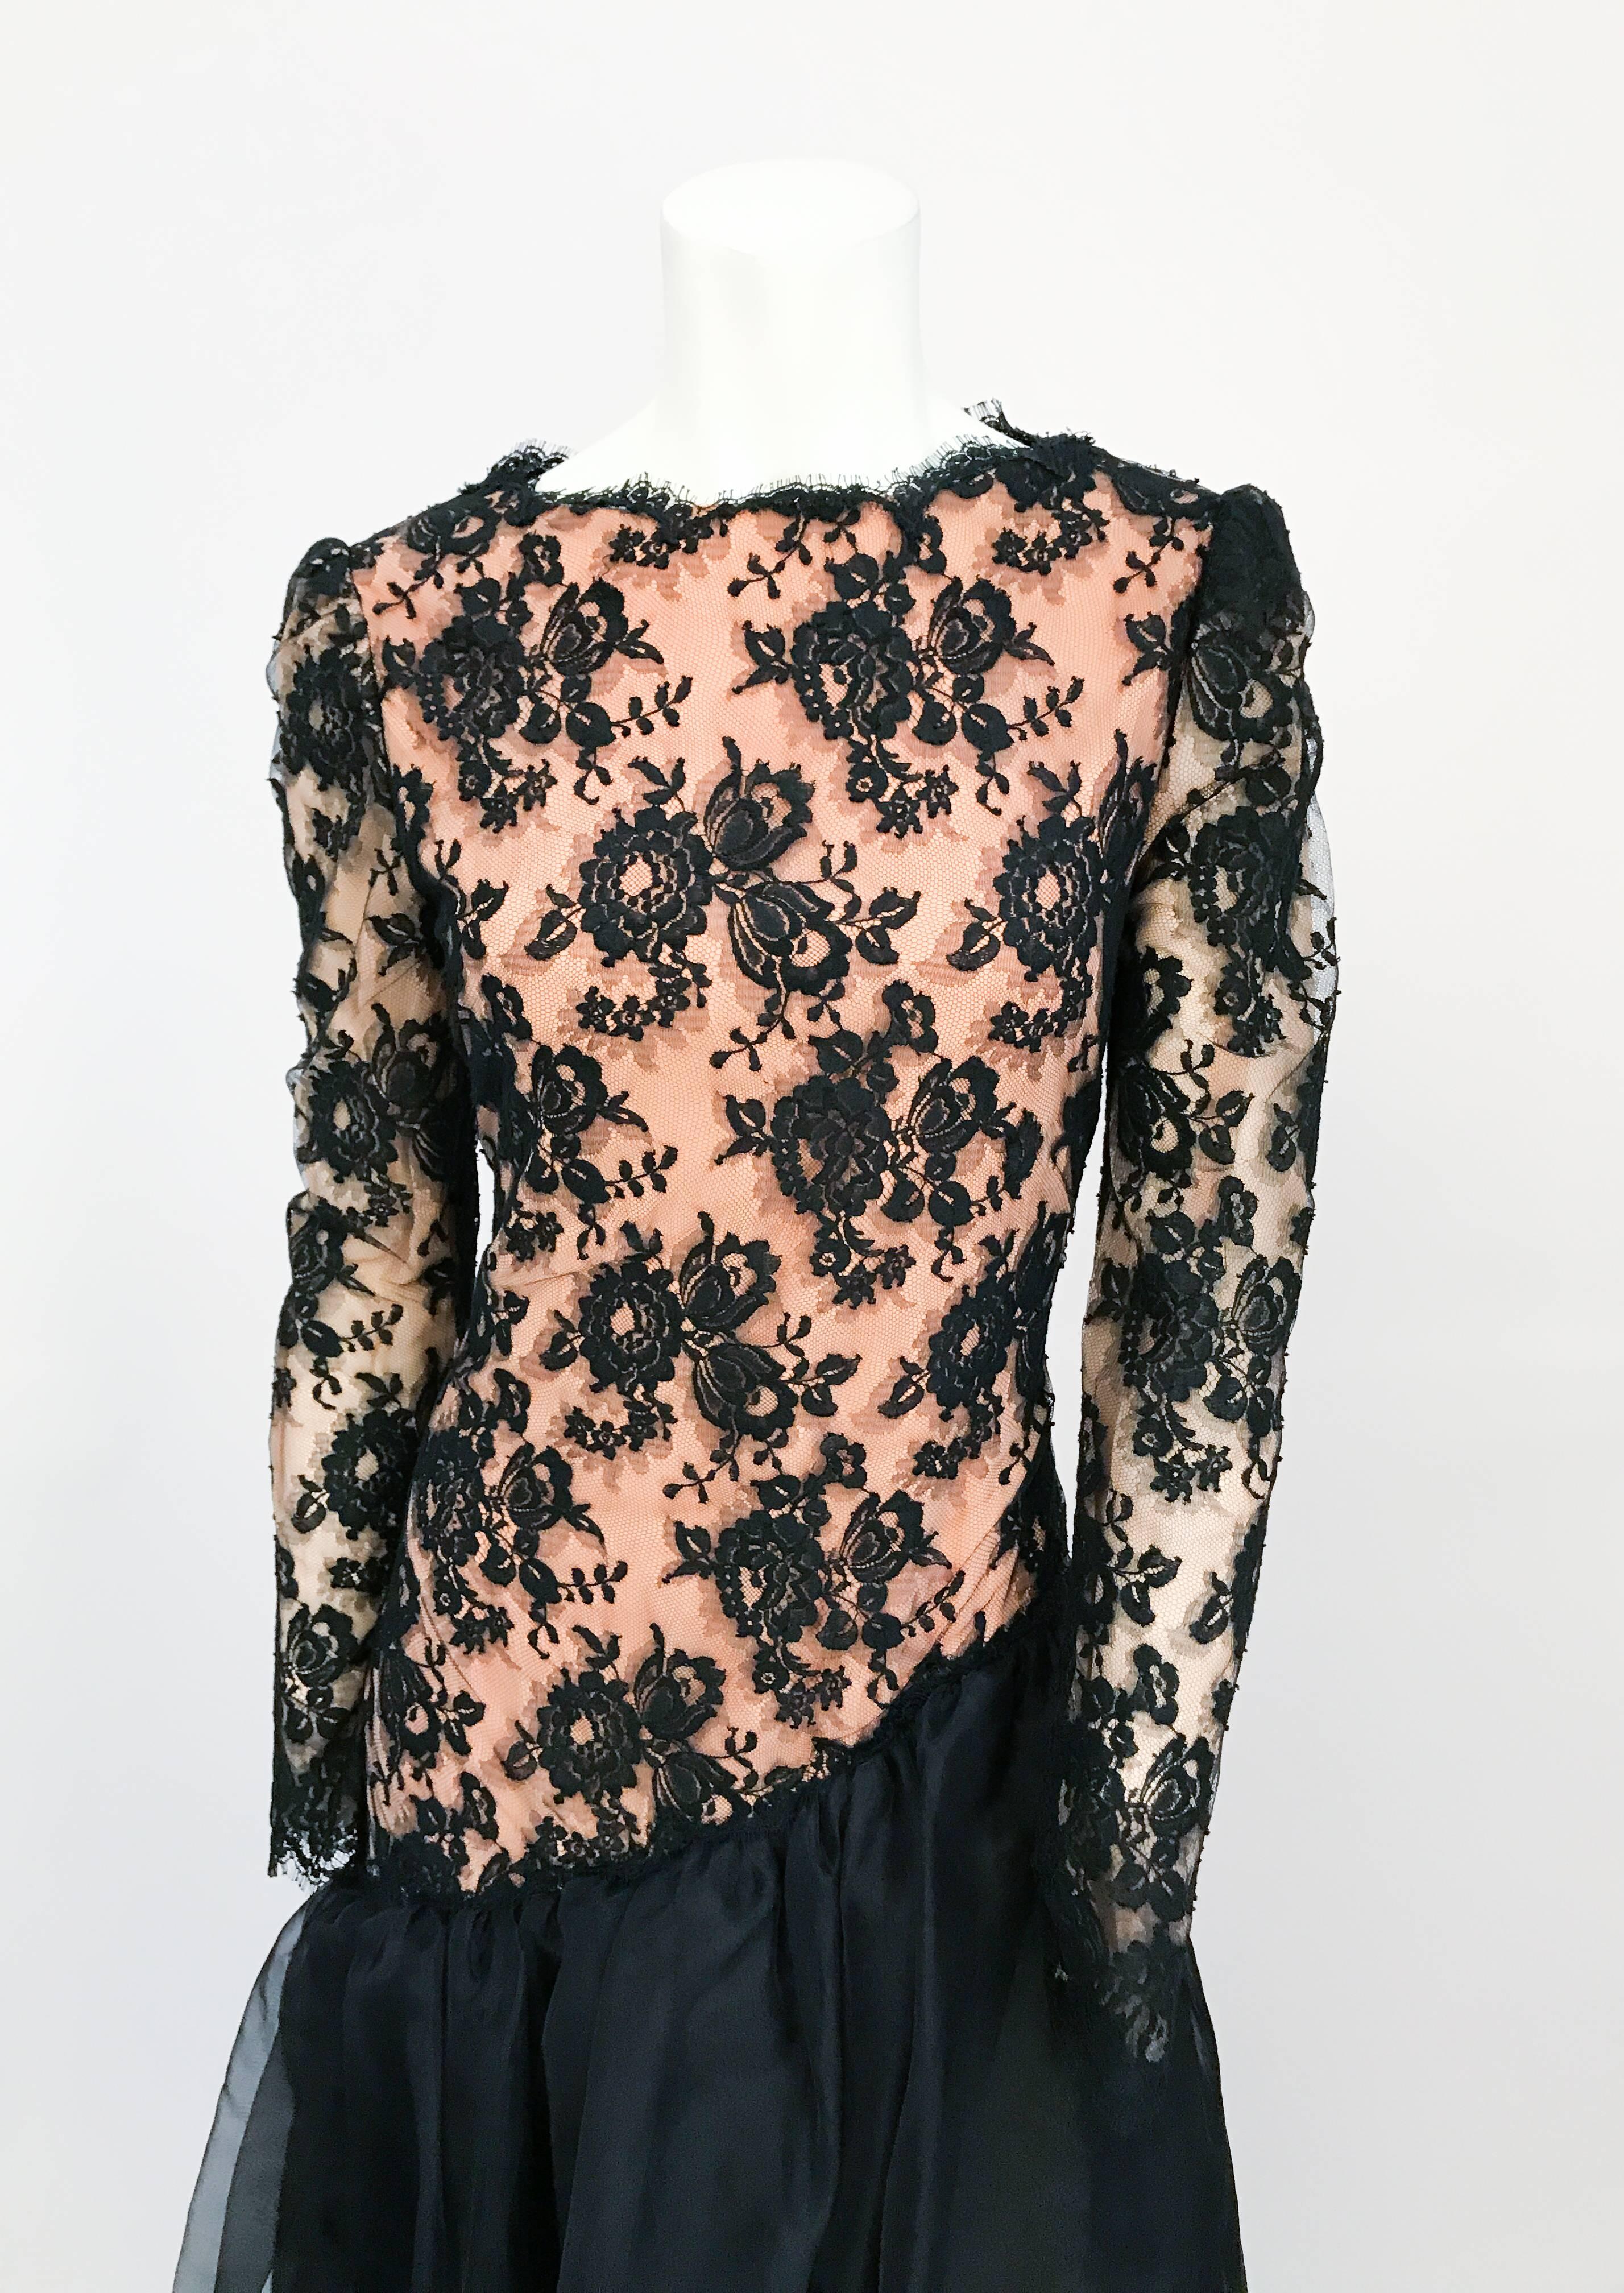 1980s Travilla Black Floral Lace Dress. Black Floral Lace dress with full sleeves, drop waist, and black sheer flare. Peach color lining that can be seen through the black floral lace.